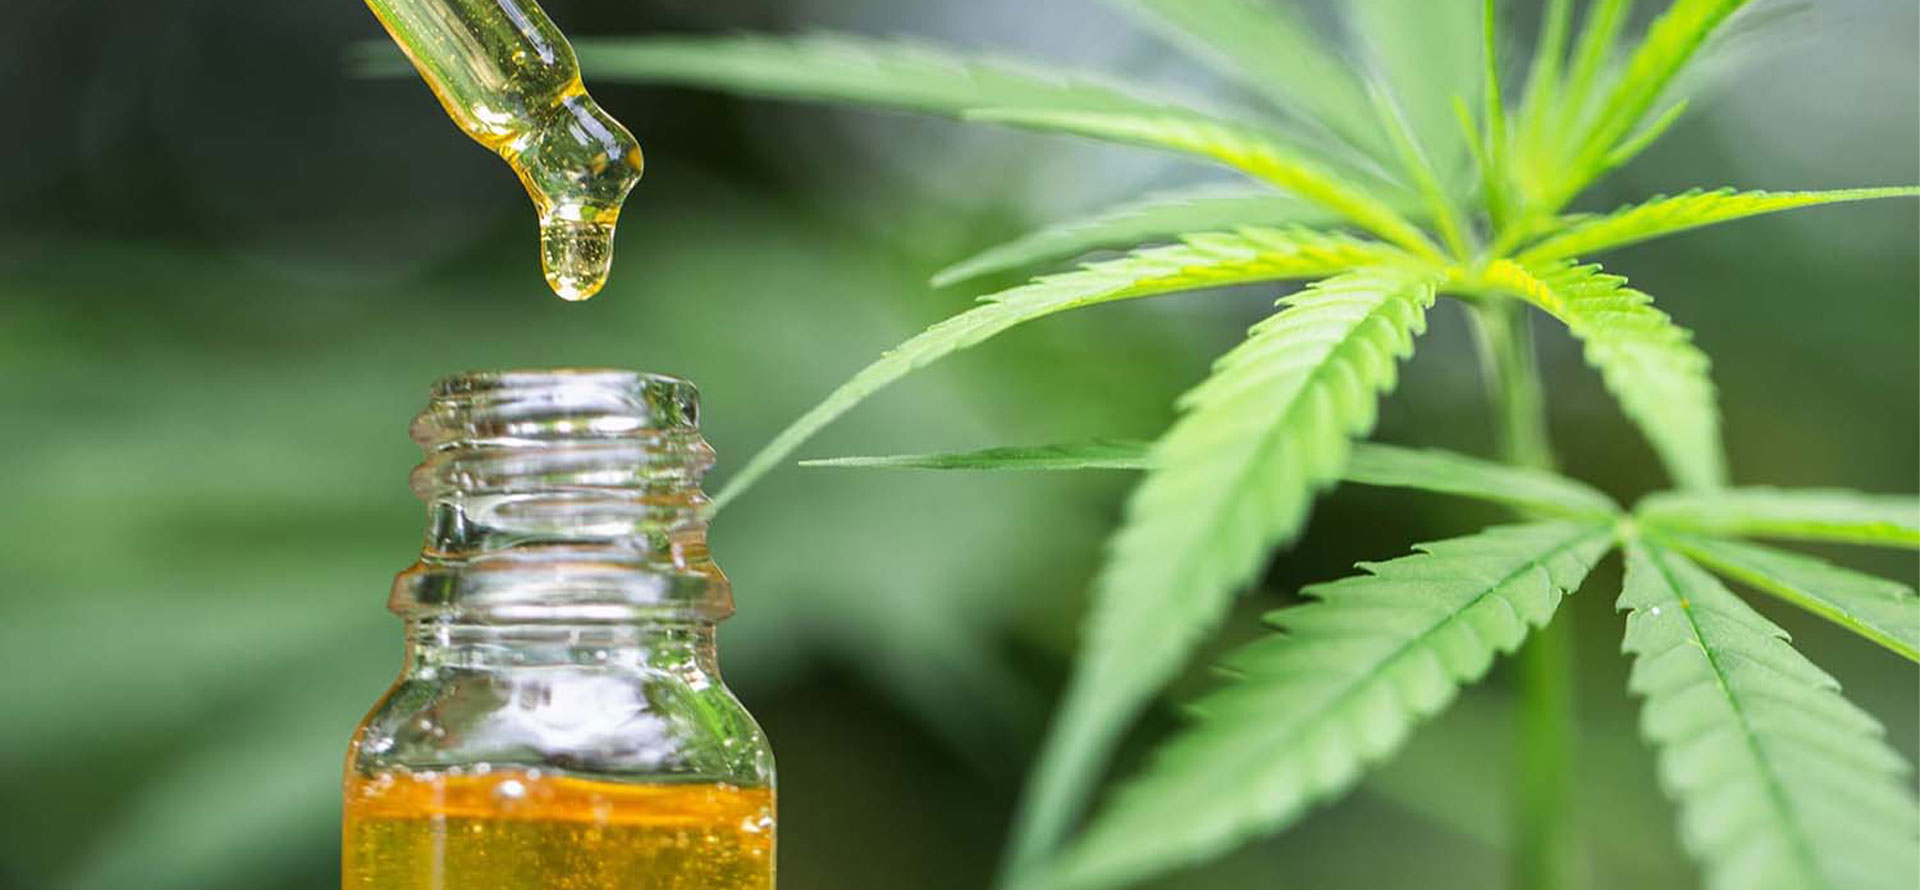 IS CBC OIL GOOD FOR A CHILD THAT IS 5 YEARS OLD FOR ADHD ADD AND HYPERACTIVITY - Cbd|Oil|Benefits|Cbc|Effects|Pain|Study|Health|Thc|Products|Cannabinoids|Studies|Research|Anxiety|Cannabis|Symptoms|Evidence|People|System|Disease|Treatment|Inflammation|Hemp|Body|Receptors|Disorders|Brain|Plant|Cells|Side|Effect|Blood|Patients|Cancer|Product|Skin|Marijuana|Properties|Cannabidiol|Cannabinoid|Cbd Oil|Cbd Products|Cbc Oil|Side Effects|Endocannabinoid System|Chronic Pain|Multiple Sclerosis|Pain Relief|Cannabis Plant|Cbd Oil Benefits|Blood Pressure|Health Benefits|High Blood Pressure|Anti-Inflammatory Properties|Neuropathic Pain|Animal Studies|Hemp Plant|Hemp Oil|Anxiety Disorders|Cbd Product|Immune System|Clinical Trials|Cbd Gummies|Nerve Cells|Nervous System|Entourage Effect|Hemp Seed Oil|United States|Cbd Oils|Drug Administration